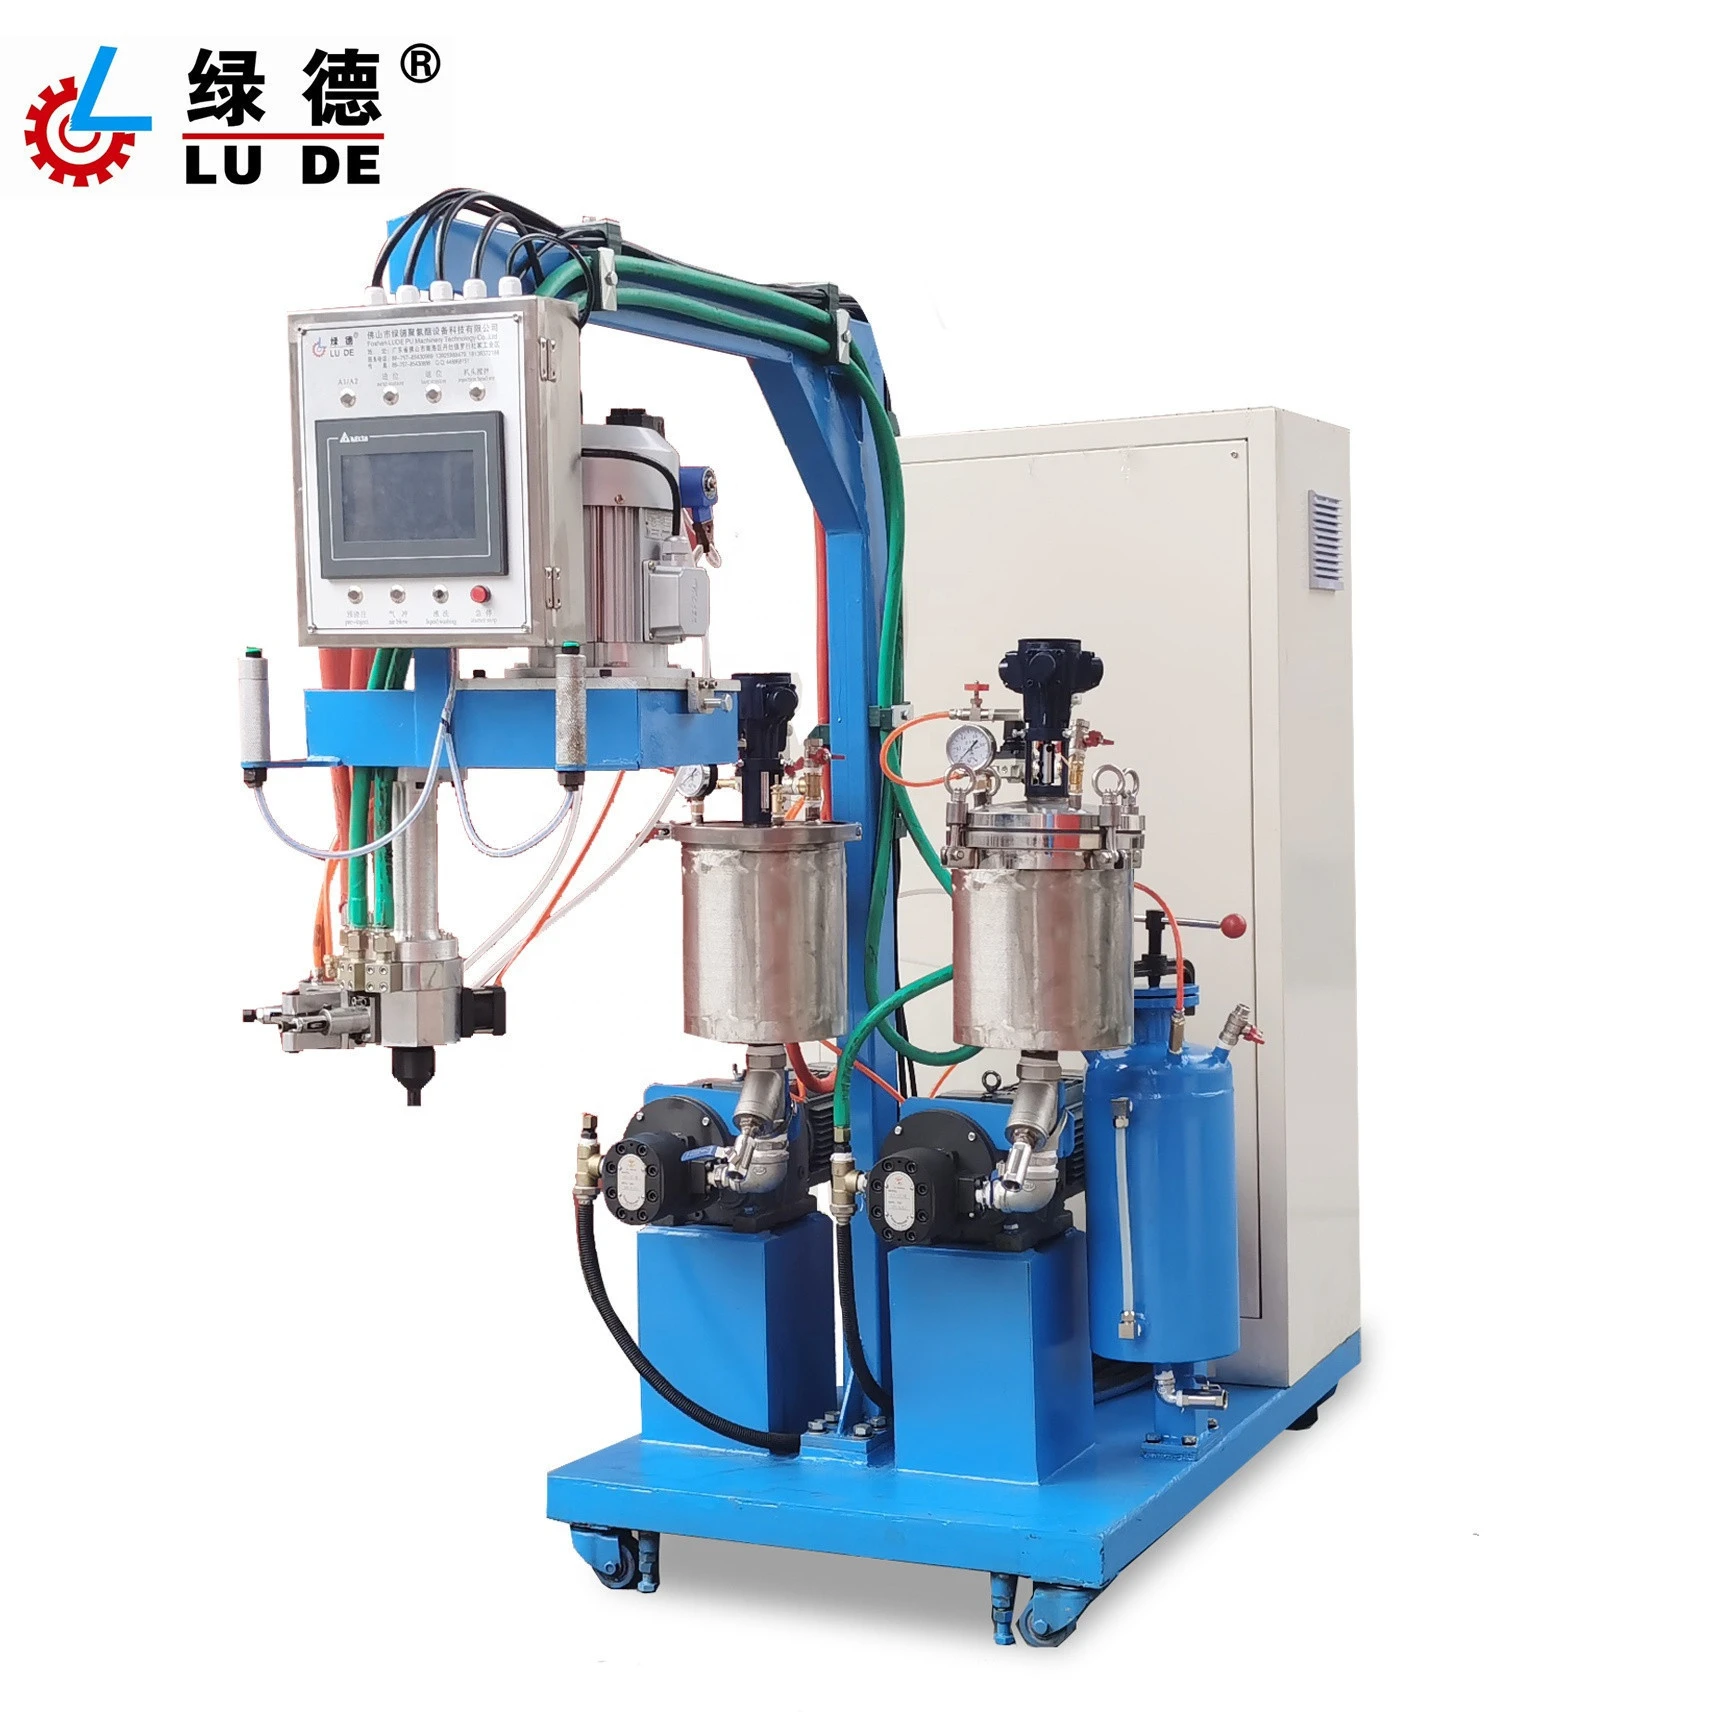 LD-803/6 8 to 15 station PU shoe sole footwear polyurethane shoe injecting machine and workbench